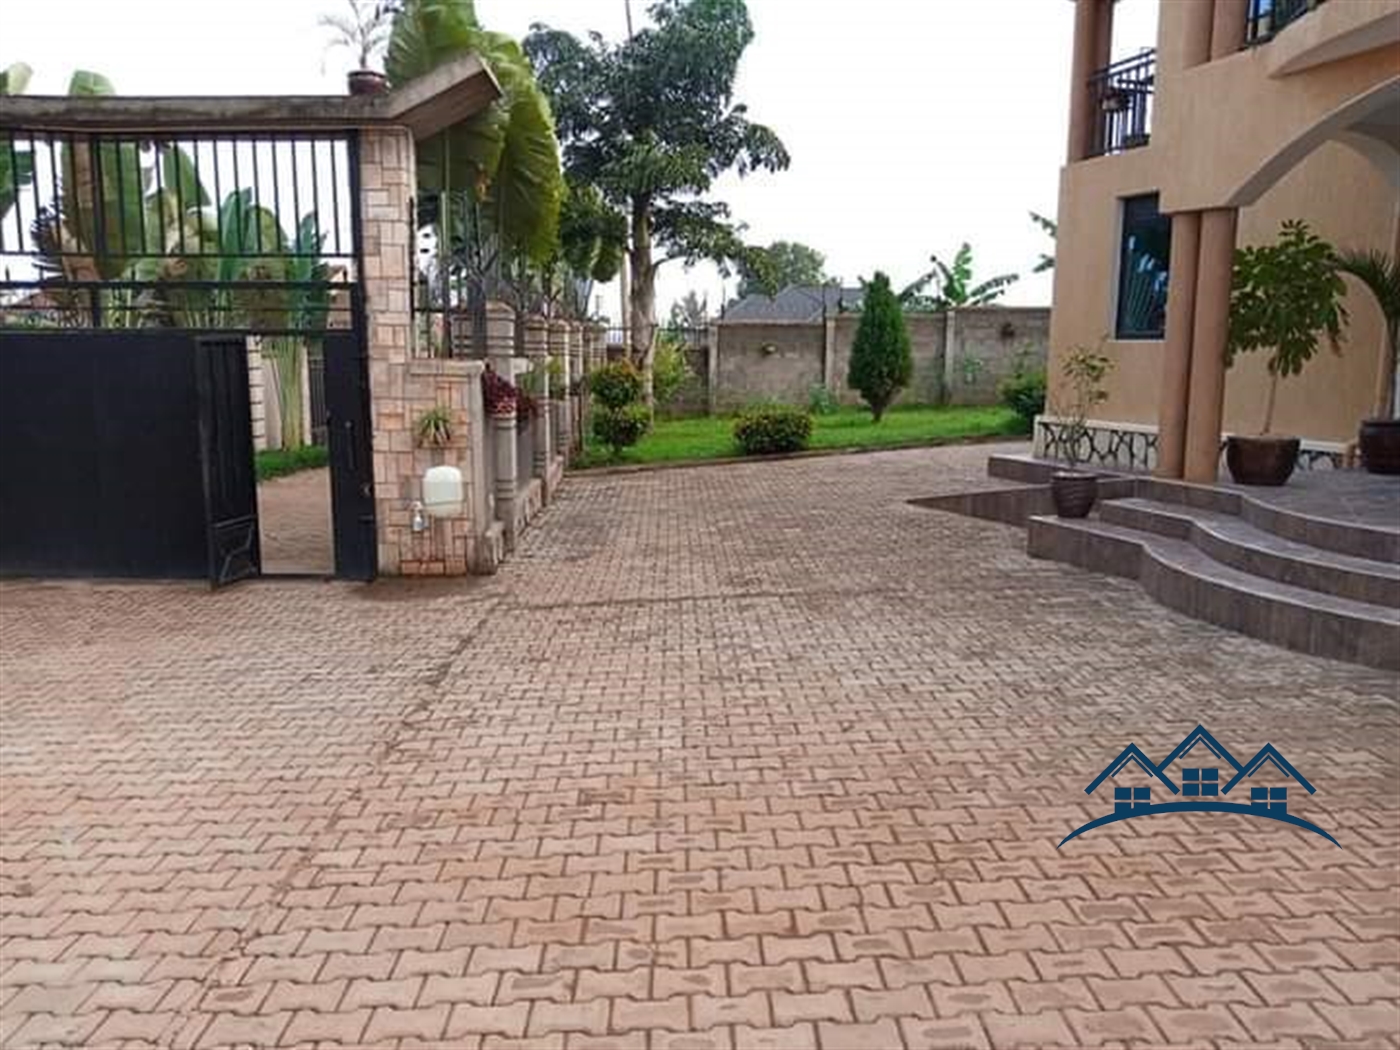 Storeyed house for sale in Sonde Mukono